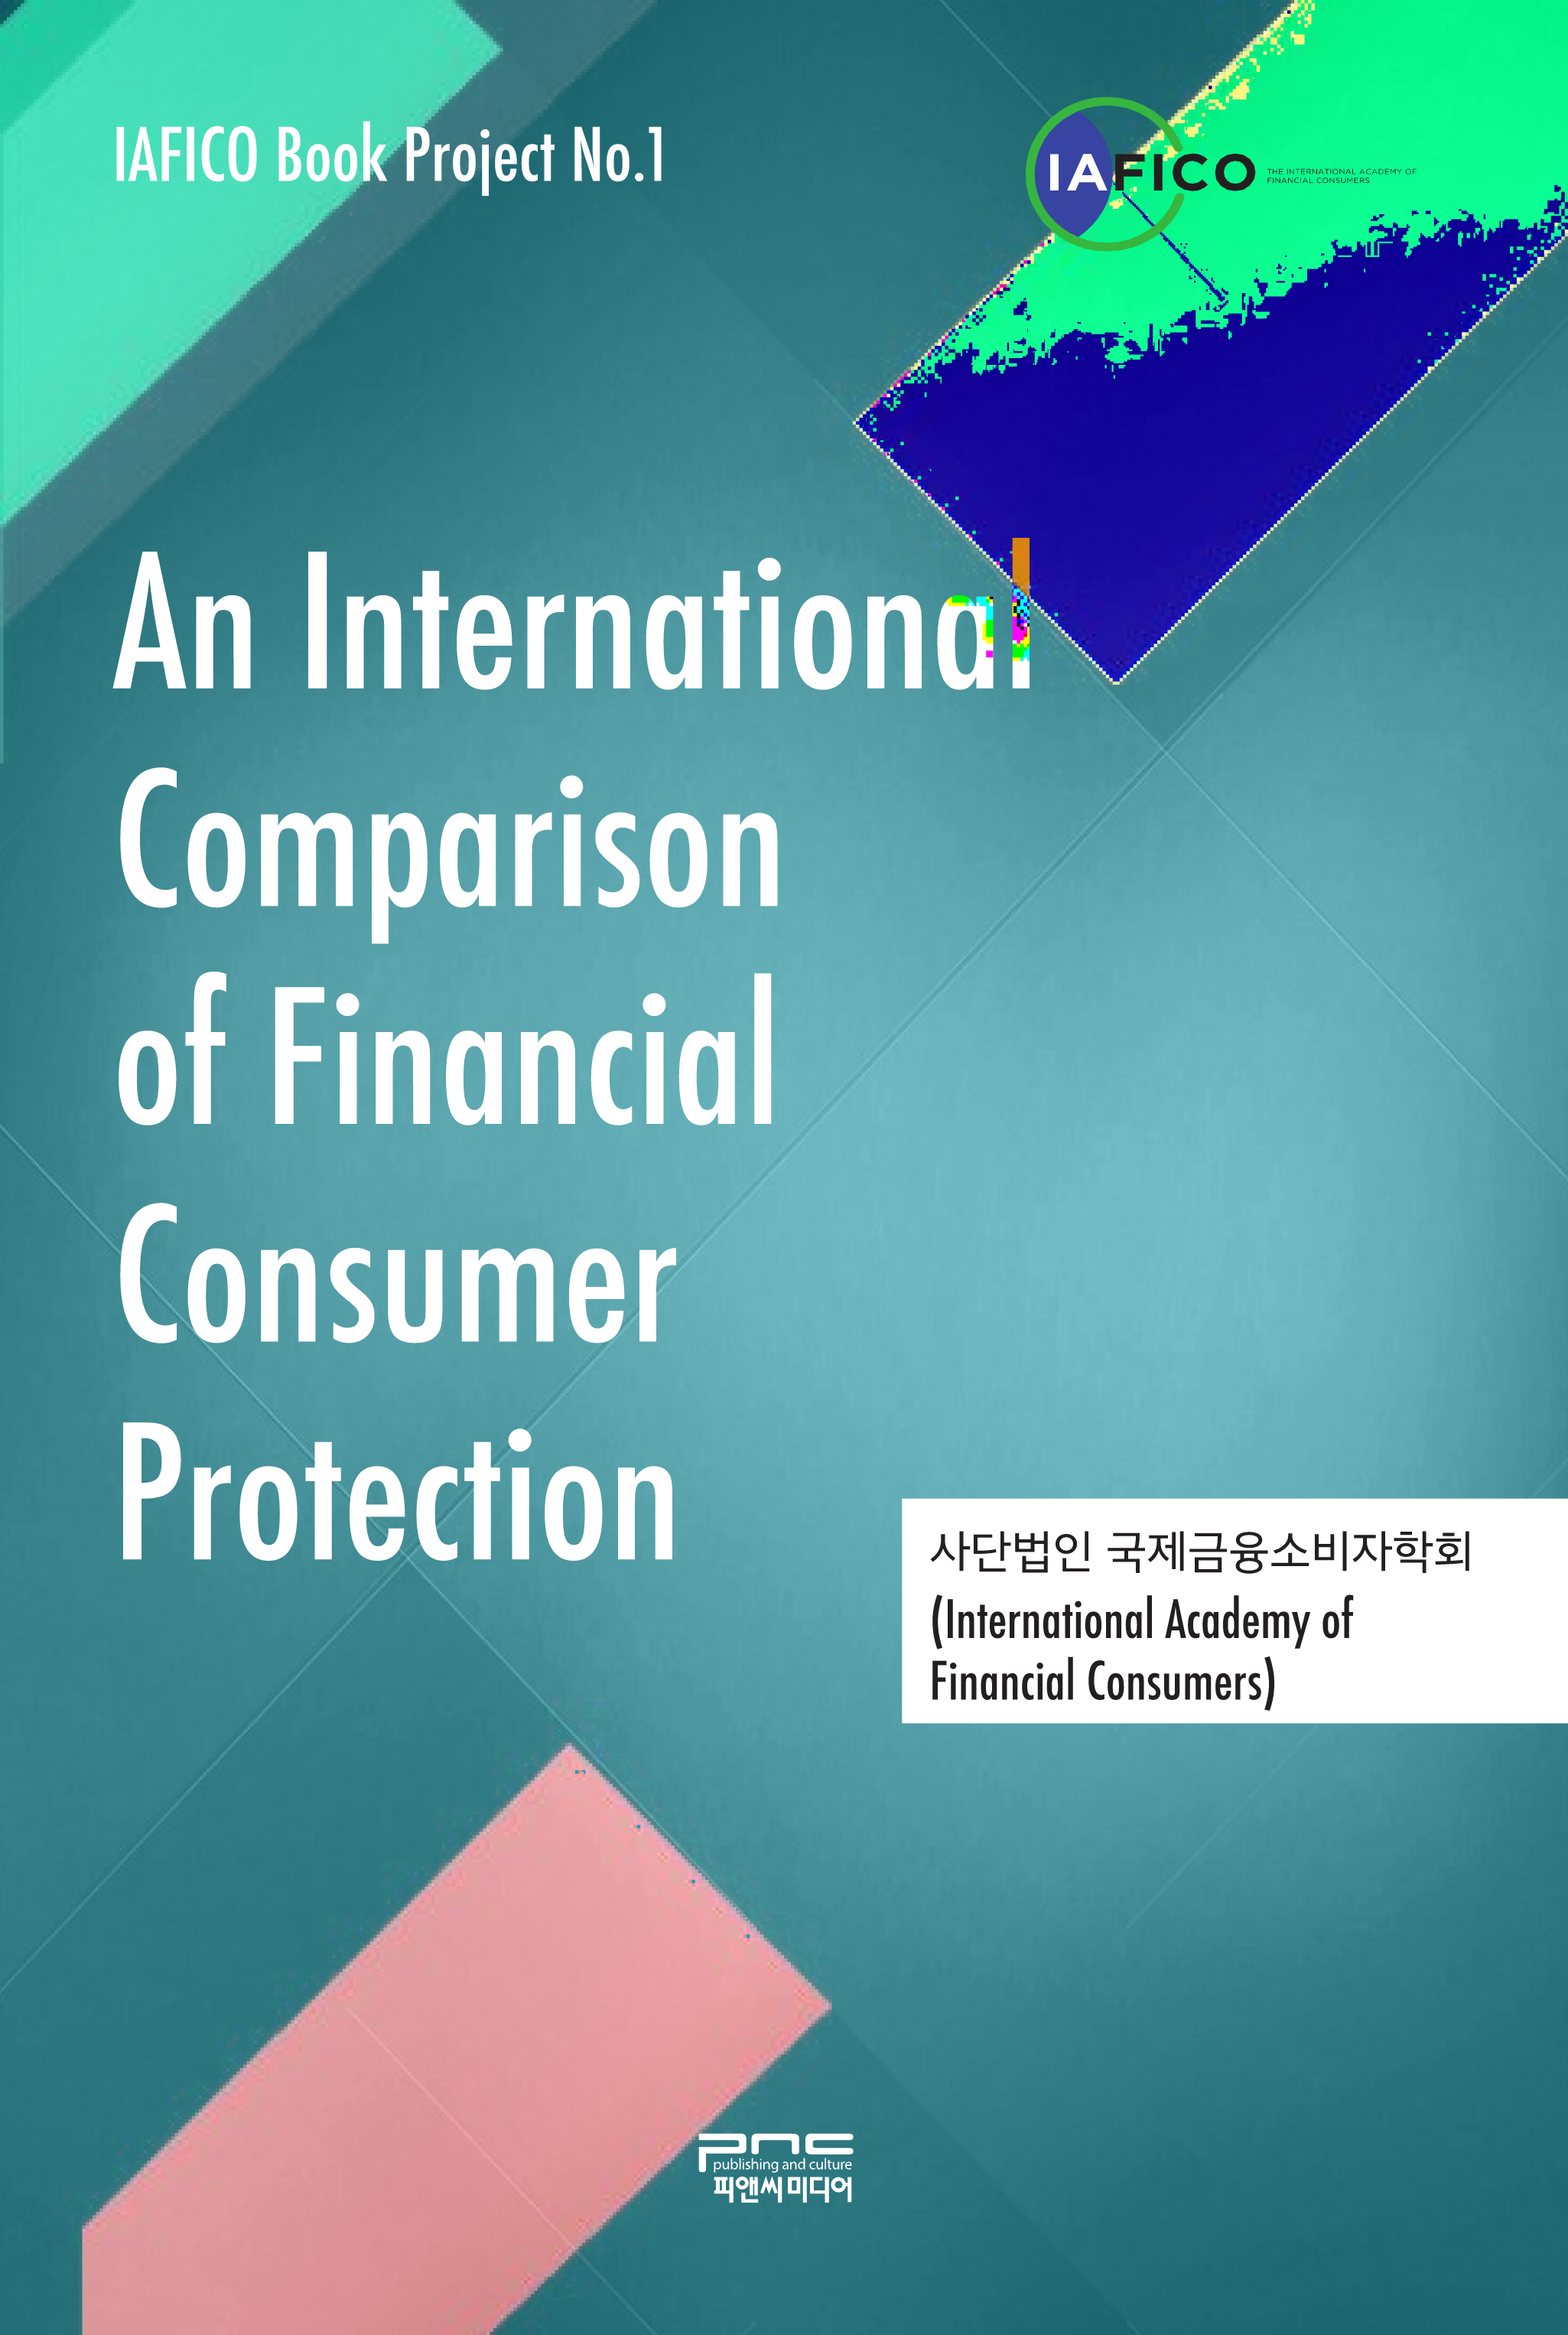 An International Comparison of Financial Consumer Protection